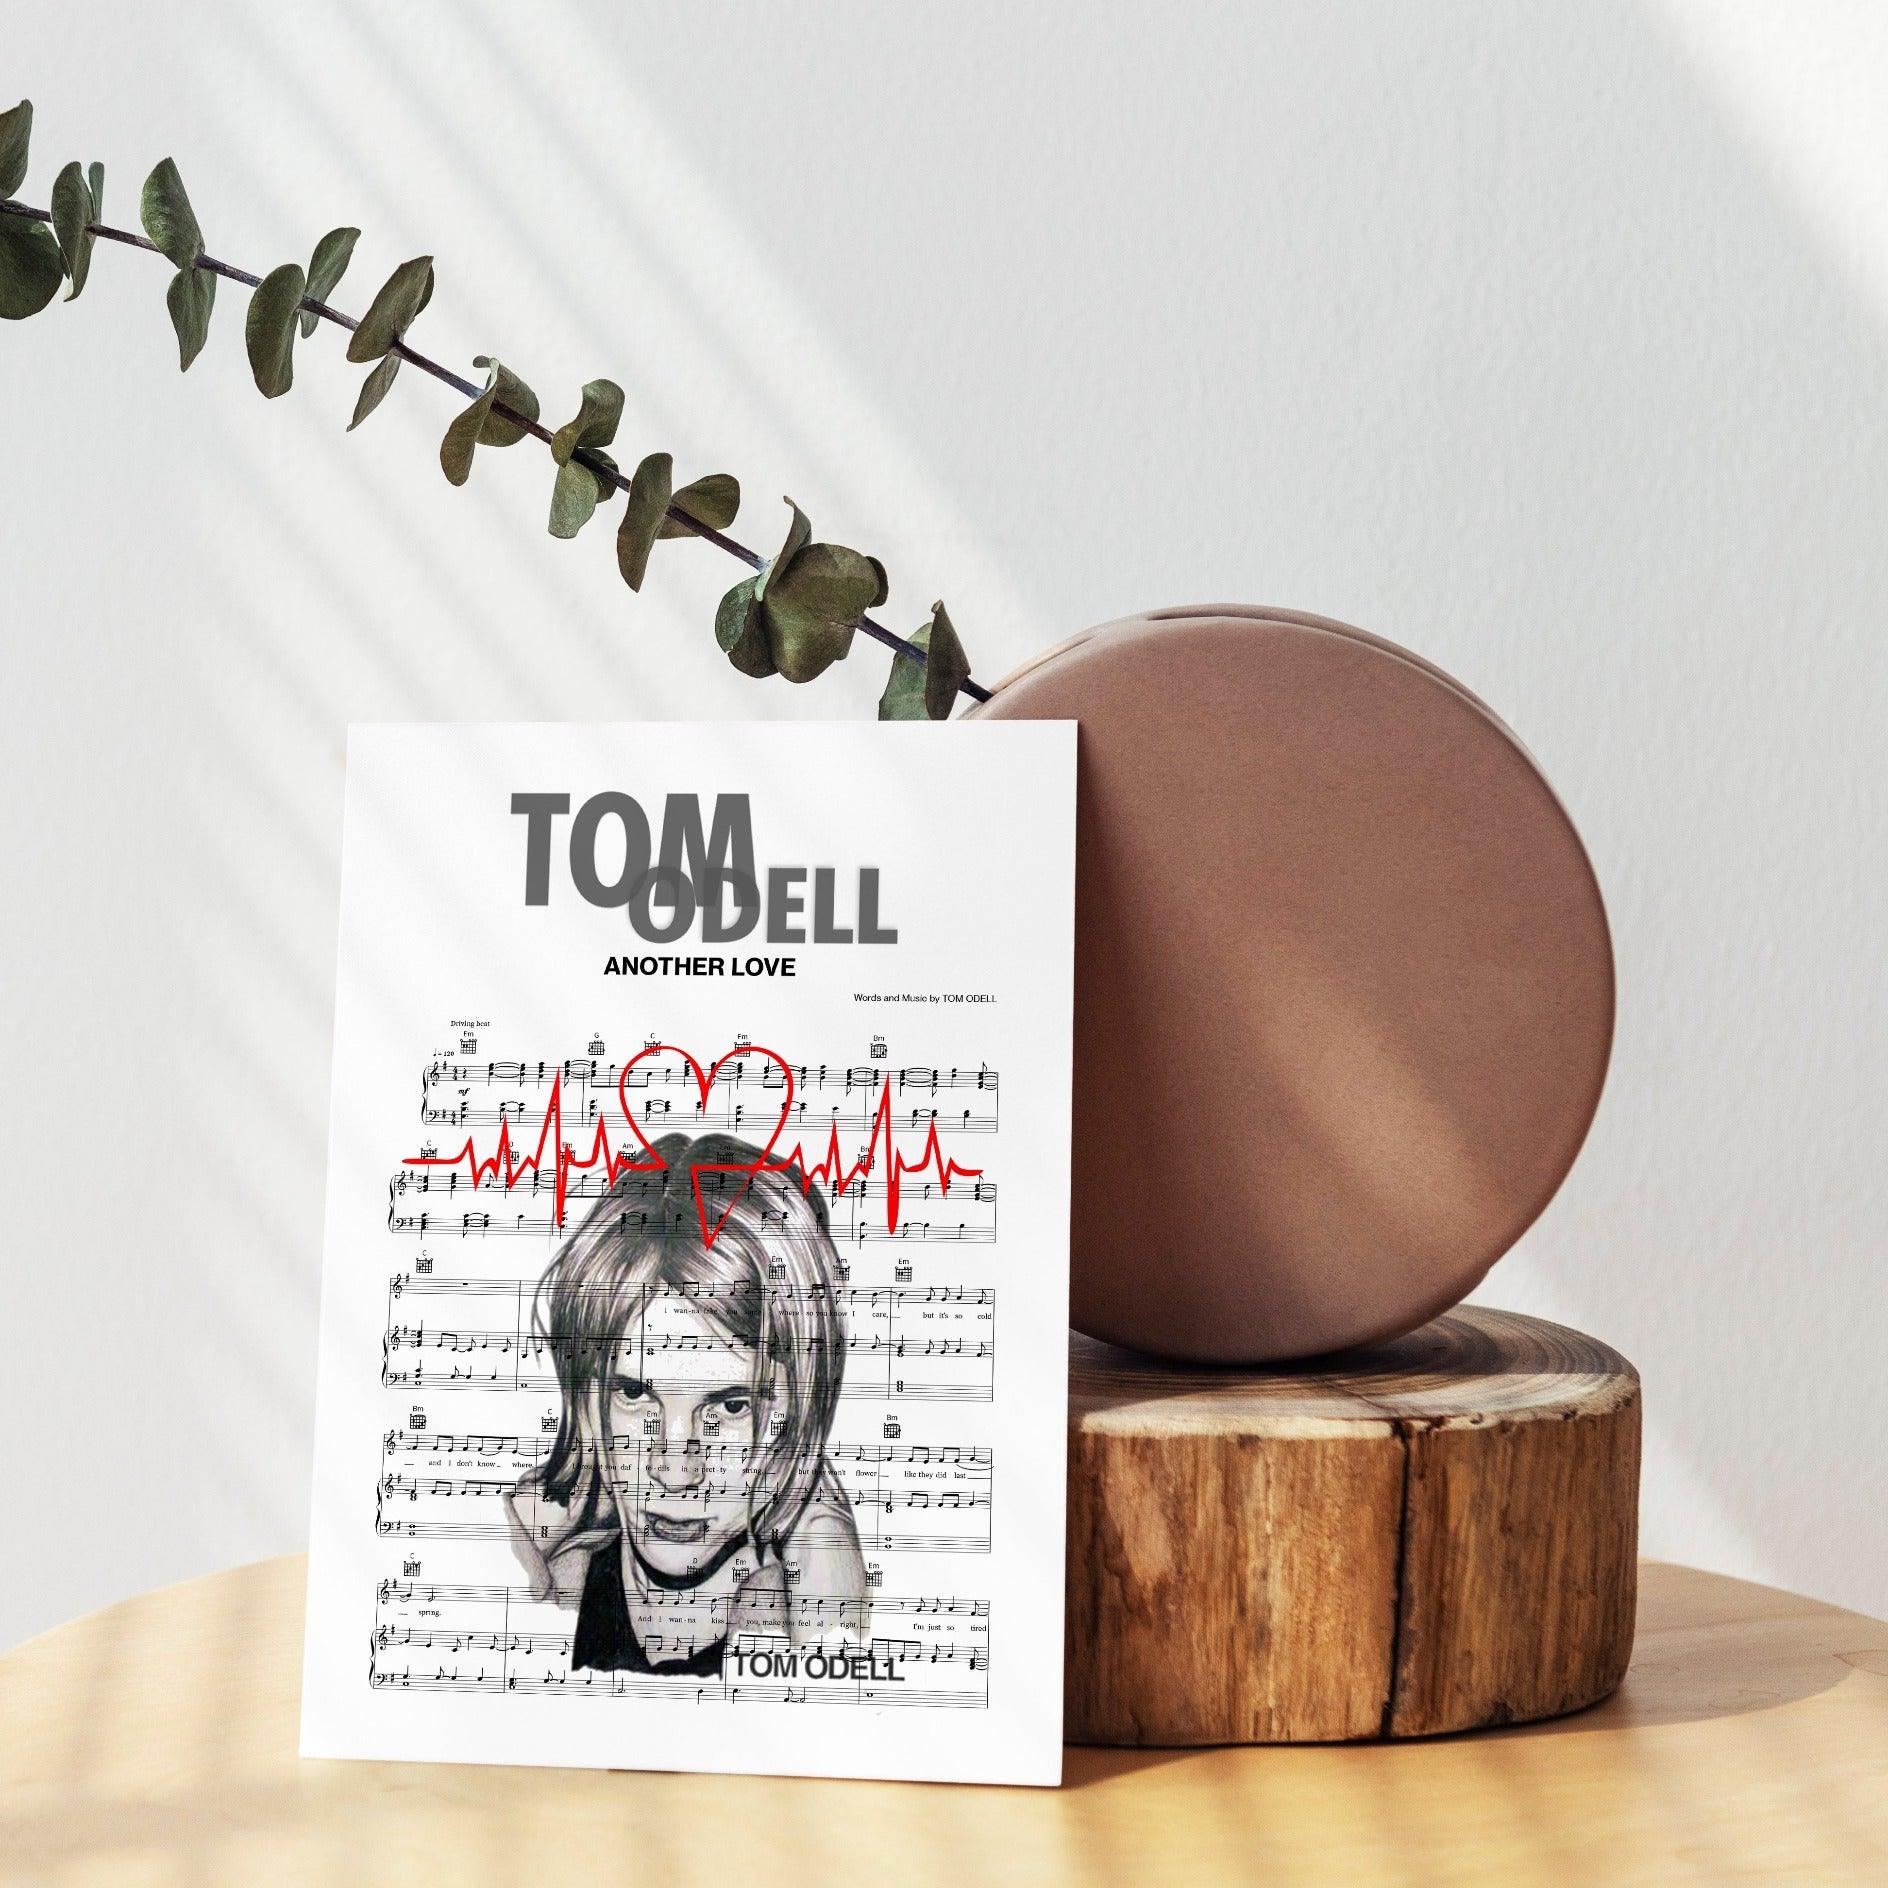 Looking for something special to add a touch of glamor to your walls? We’ve got just what you need with this stunning Tom Odell – ANOTHER LOVE Poster. Featuring the talented British singer-songwriter, this poster is the perfect way to add some music-inspired art to your walls. Perfect for fans of Tom Odell, this poster is sure to make a statement in any room.